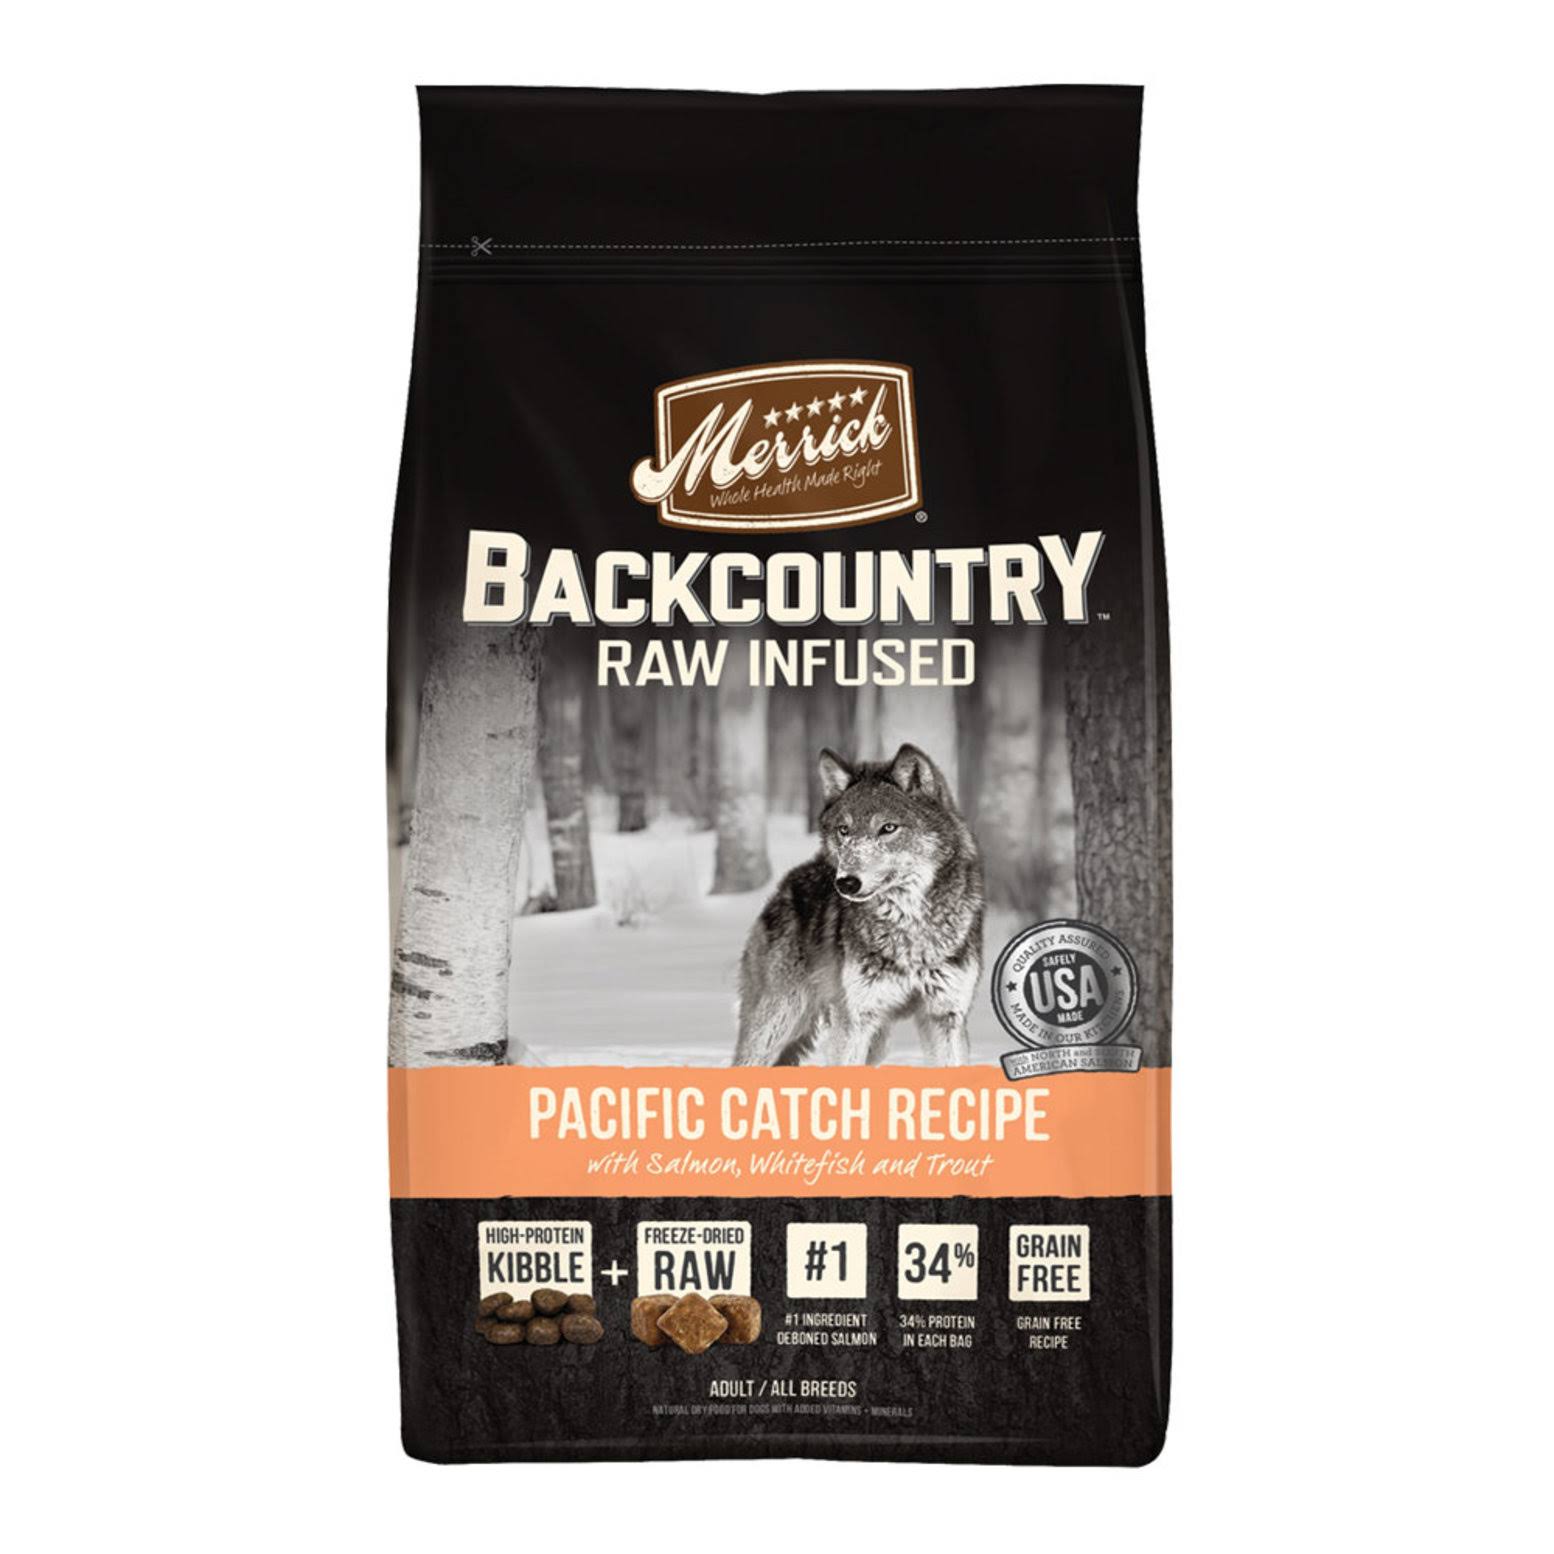 Merrick Backcountry Raw Infused Pacific Catch Recipe Adult Dry Dog Food - 12lb